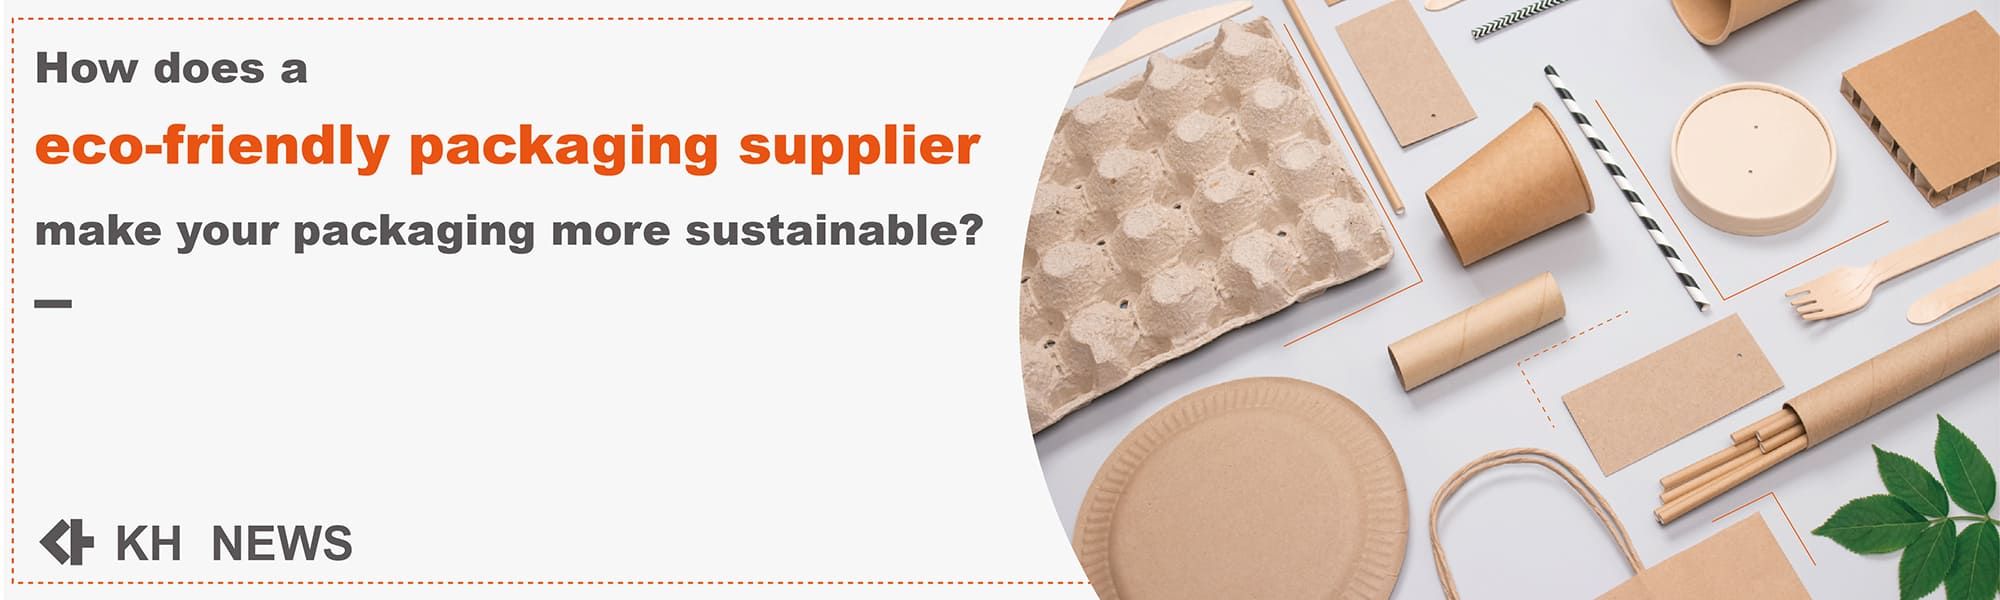 How does a eco-friendly packaging supplier make your packaging more sustainable?